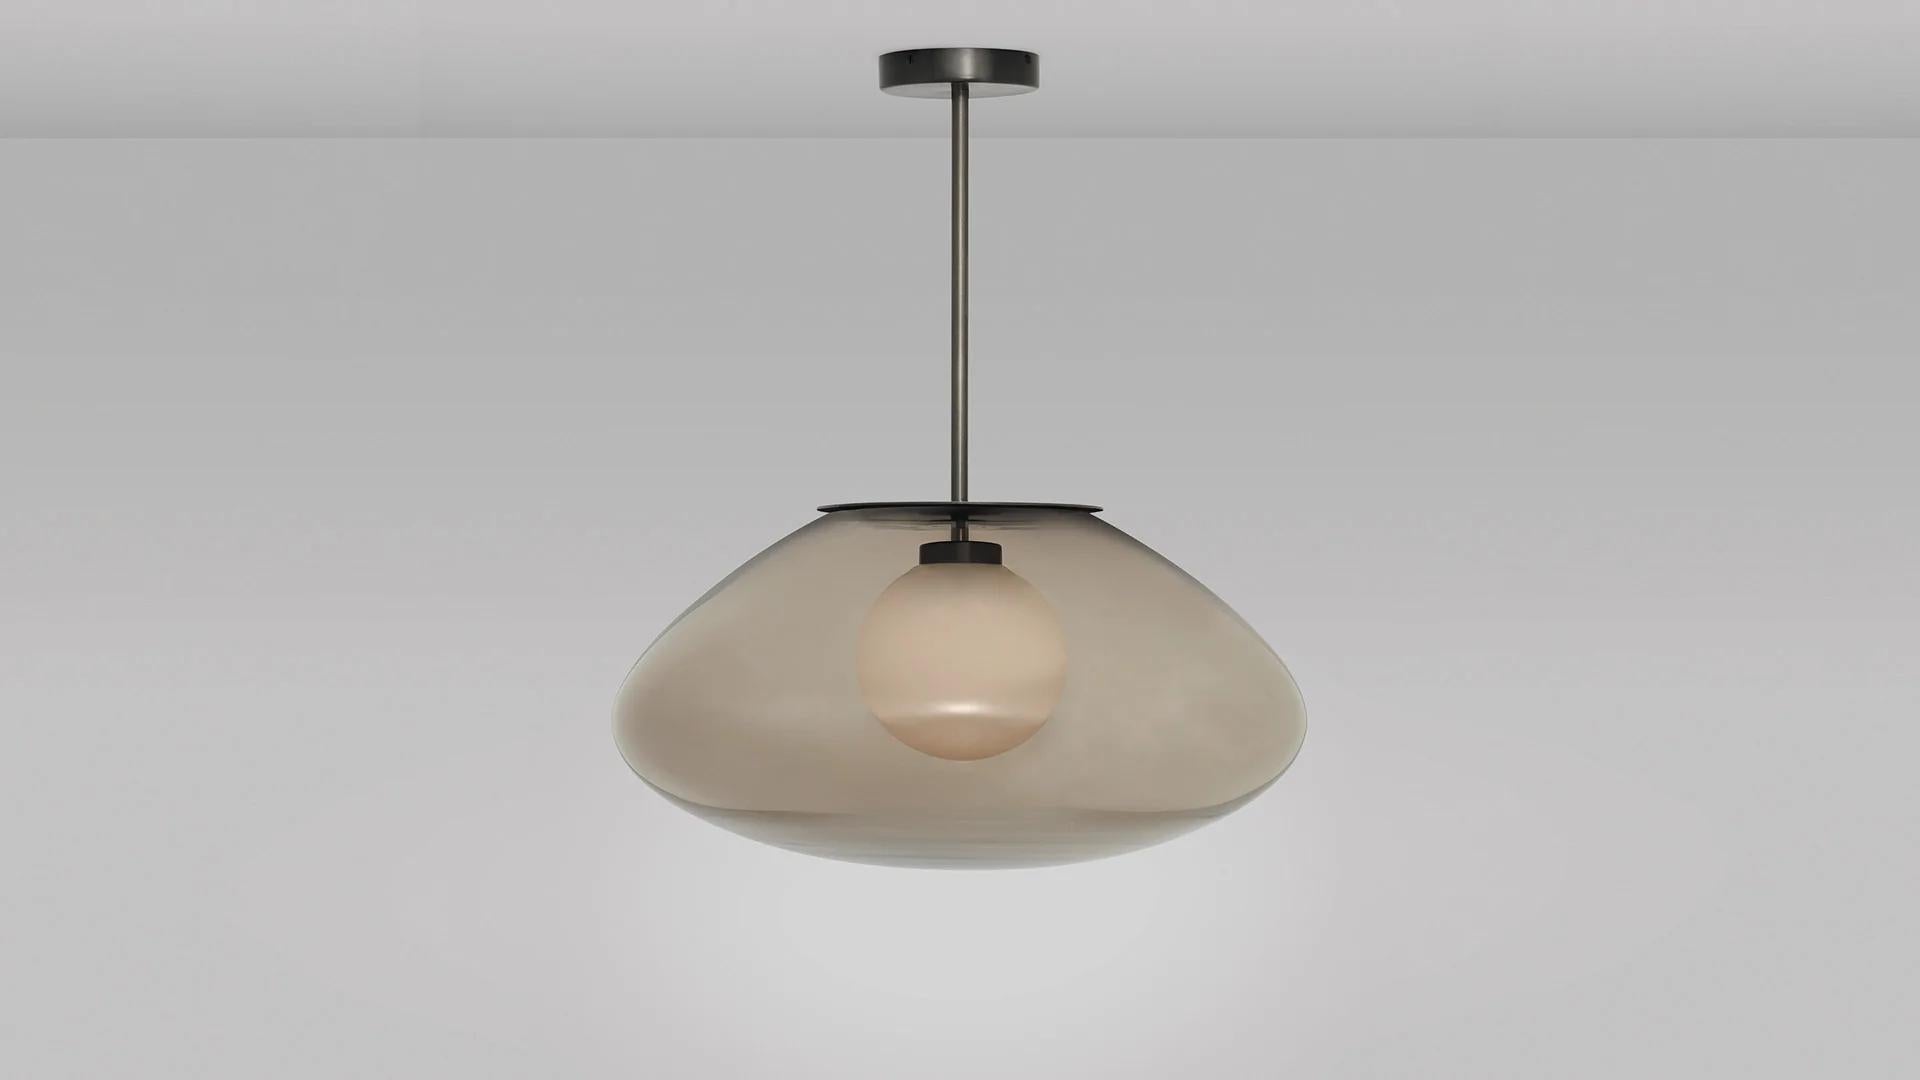 Petra small pendant by CTO Lighting.
Materials: dark bronze brass with smoked glass shade and white opal glass inner shade.
Also available in satin with smoked glass shade and hand shaped smoked glass inner shade,
satin brass with smoked glass shade